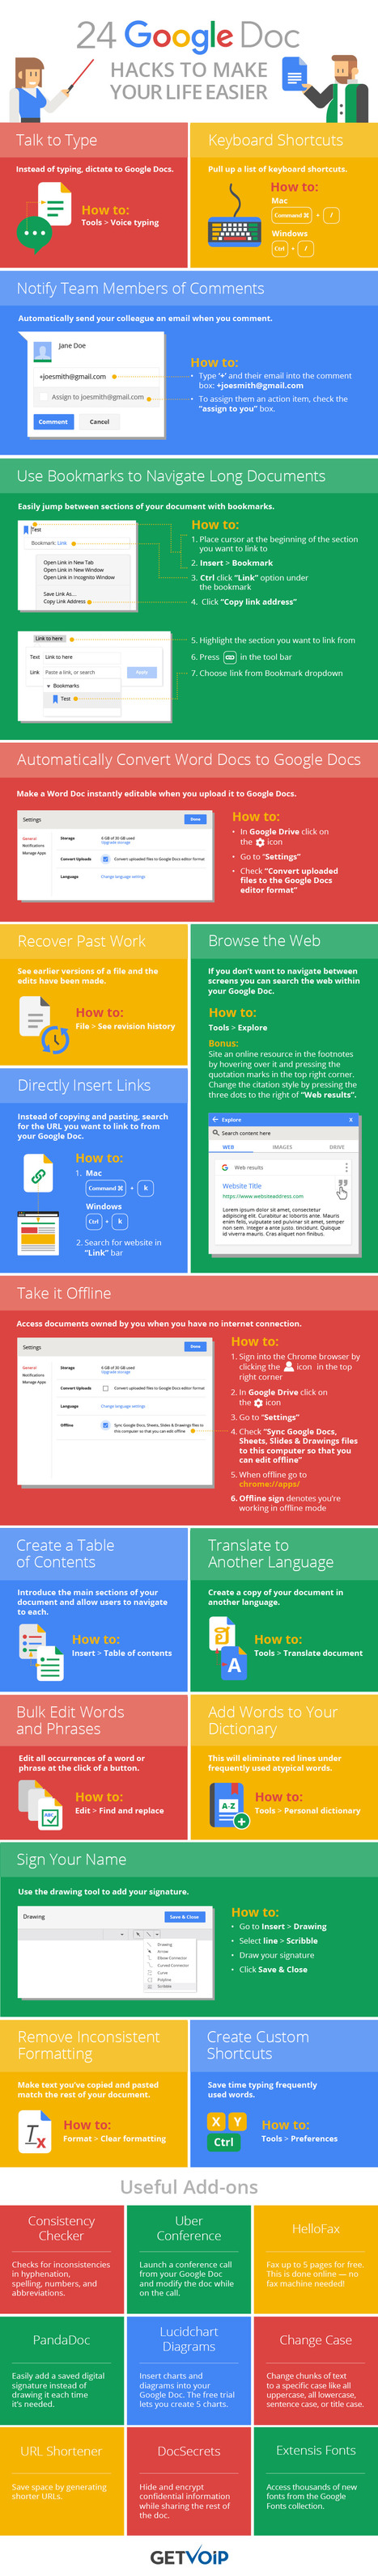 Get Things Done: 24 Google Doc Tips For Productivity - via teachthought | iGeneration - 21st Century Education (Pedagogy & Digital Innovation) | Scoop.it